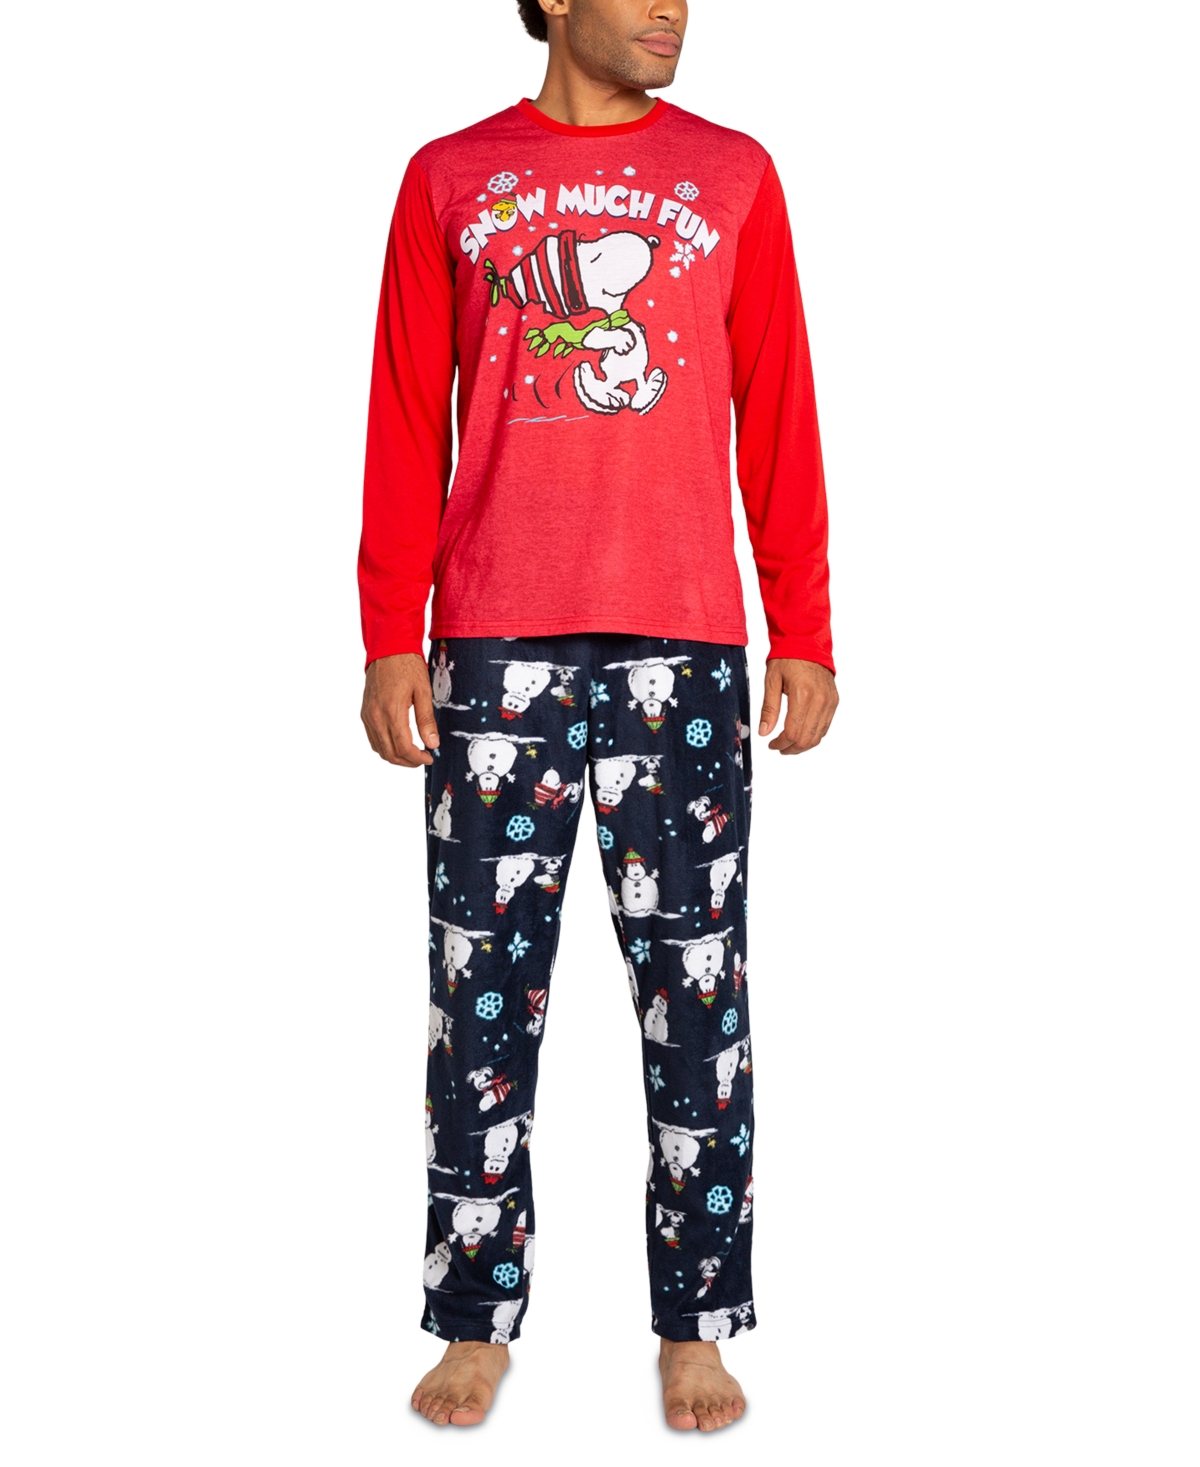 Briefly Stated Matching Men's Peanuts Long-sleeve Top And Pajama Pants Set In Grey